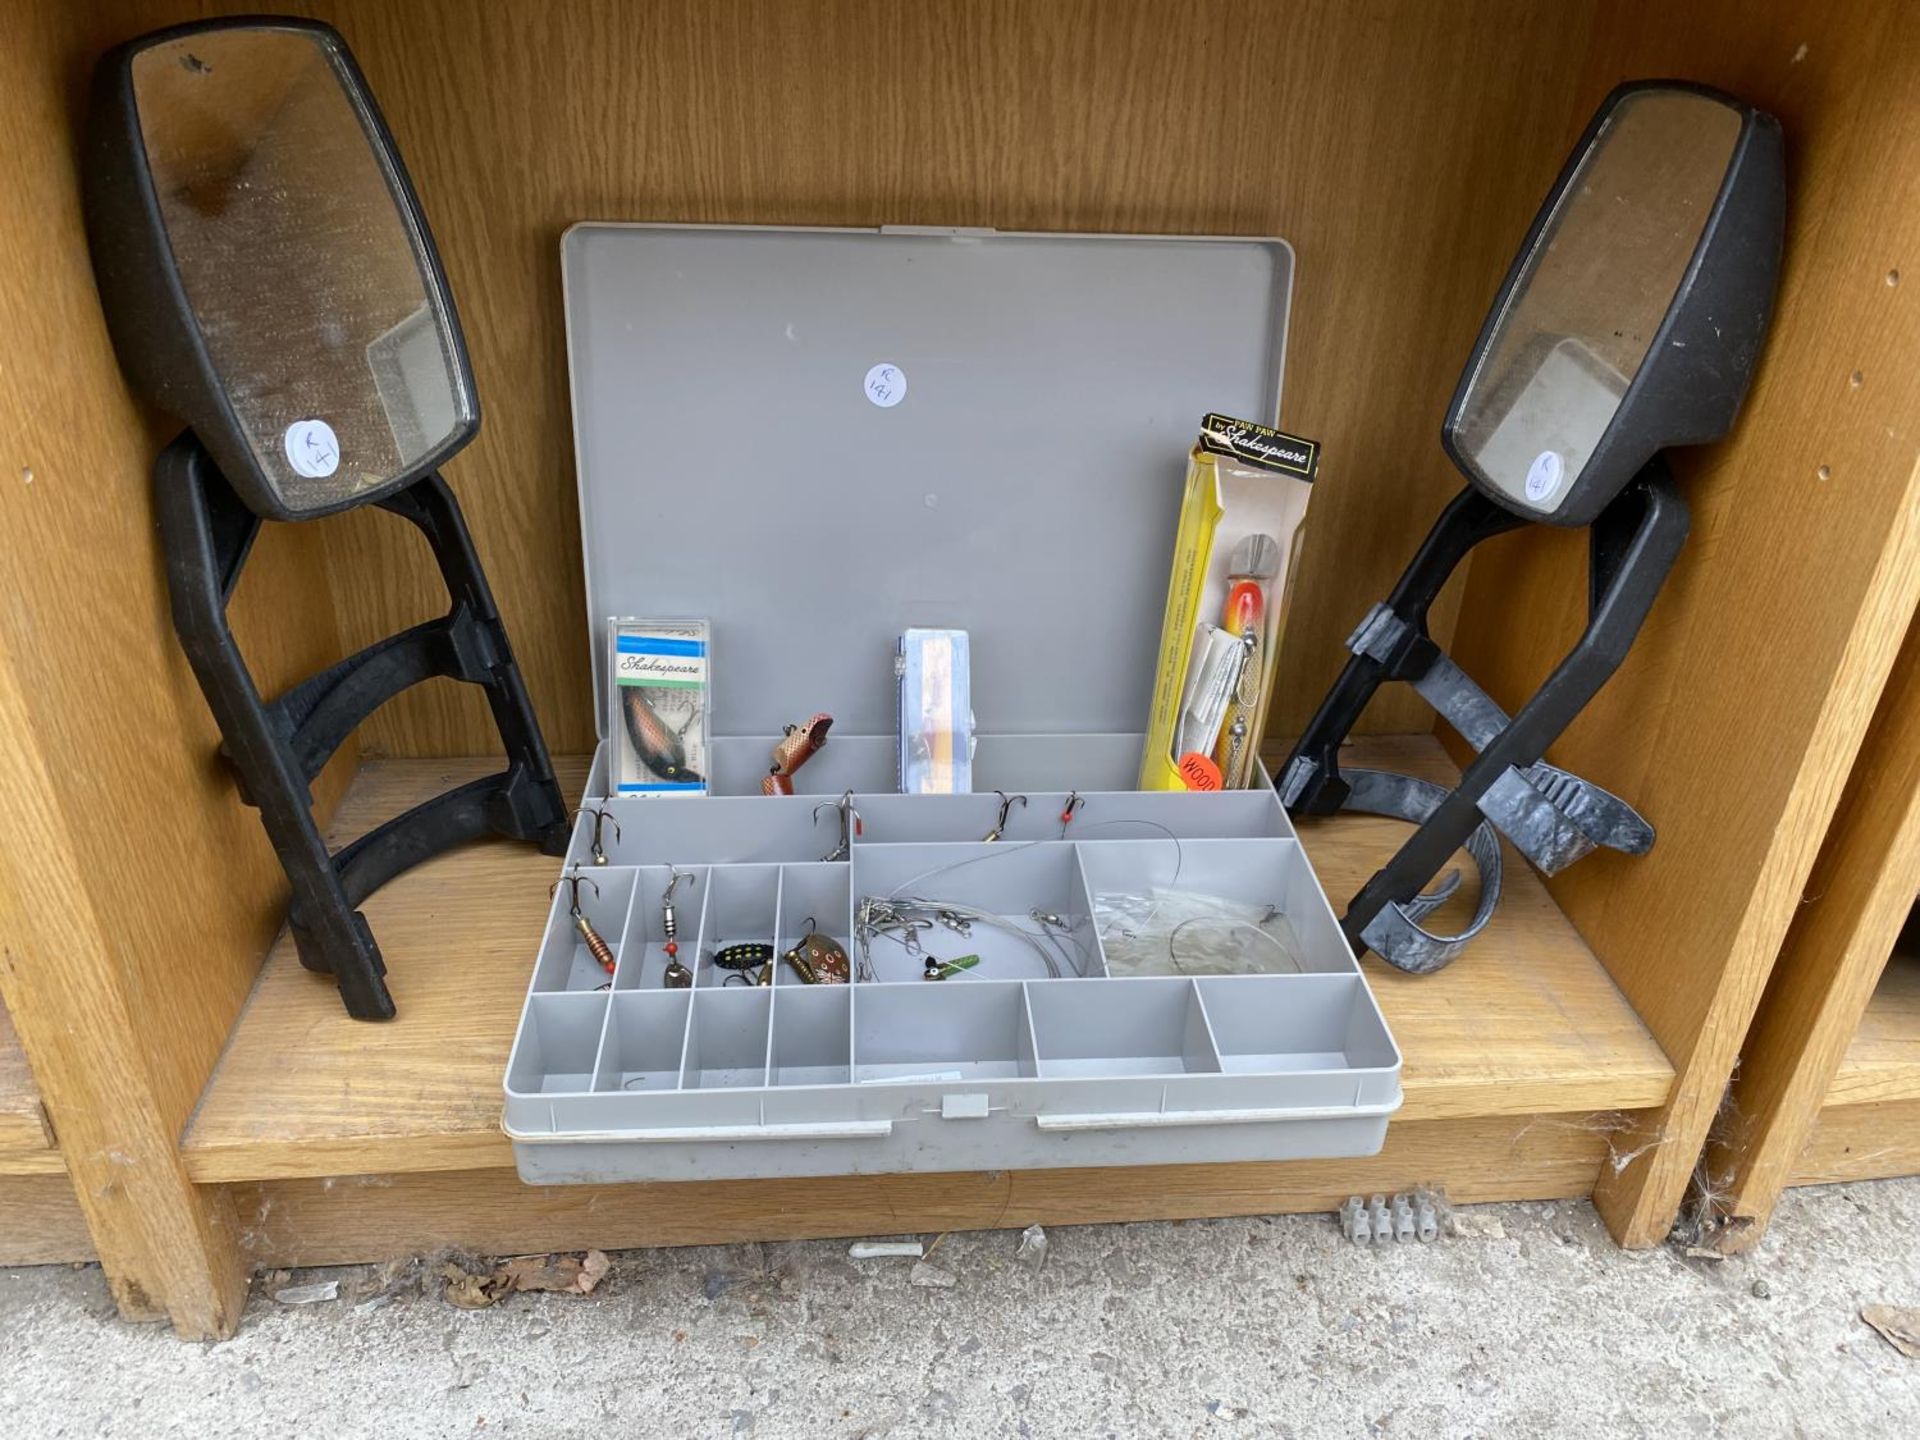 TWO EXTENSION WING MIRRORS AND A FISHING TACKLE BOX WITH LURES